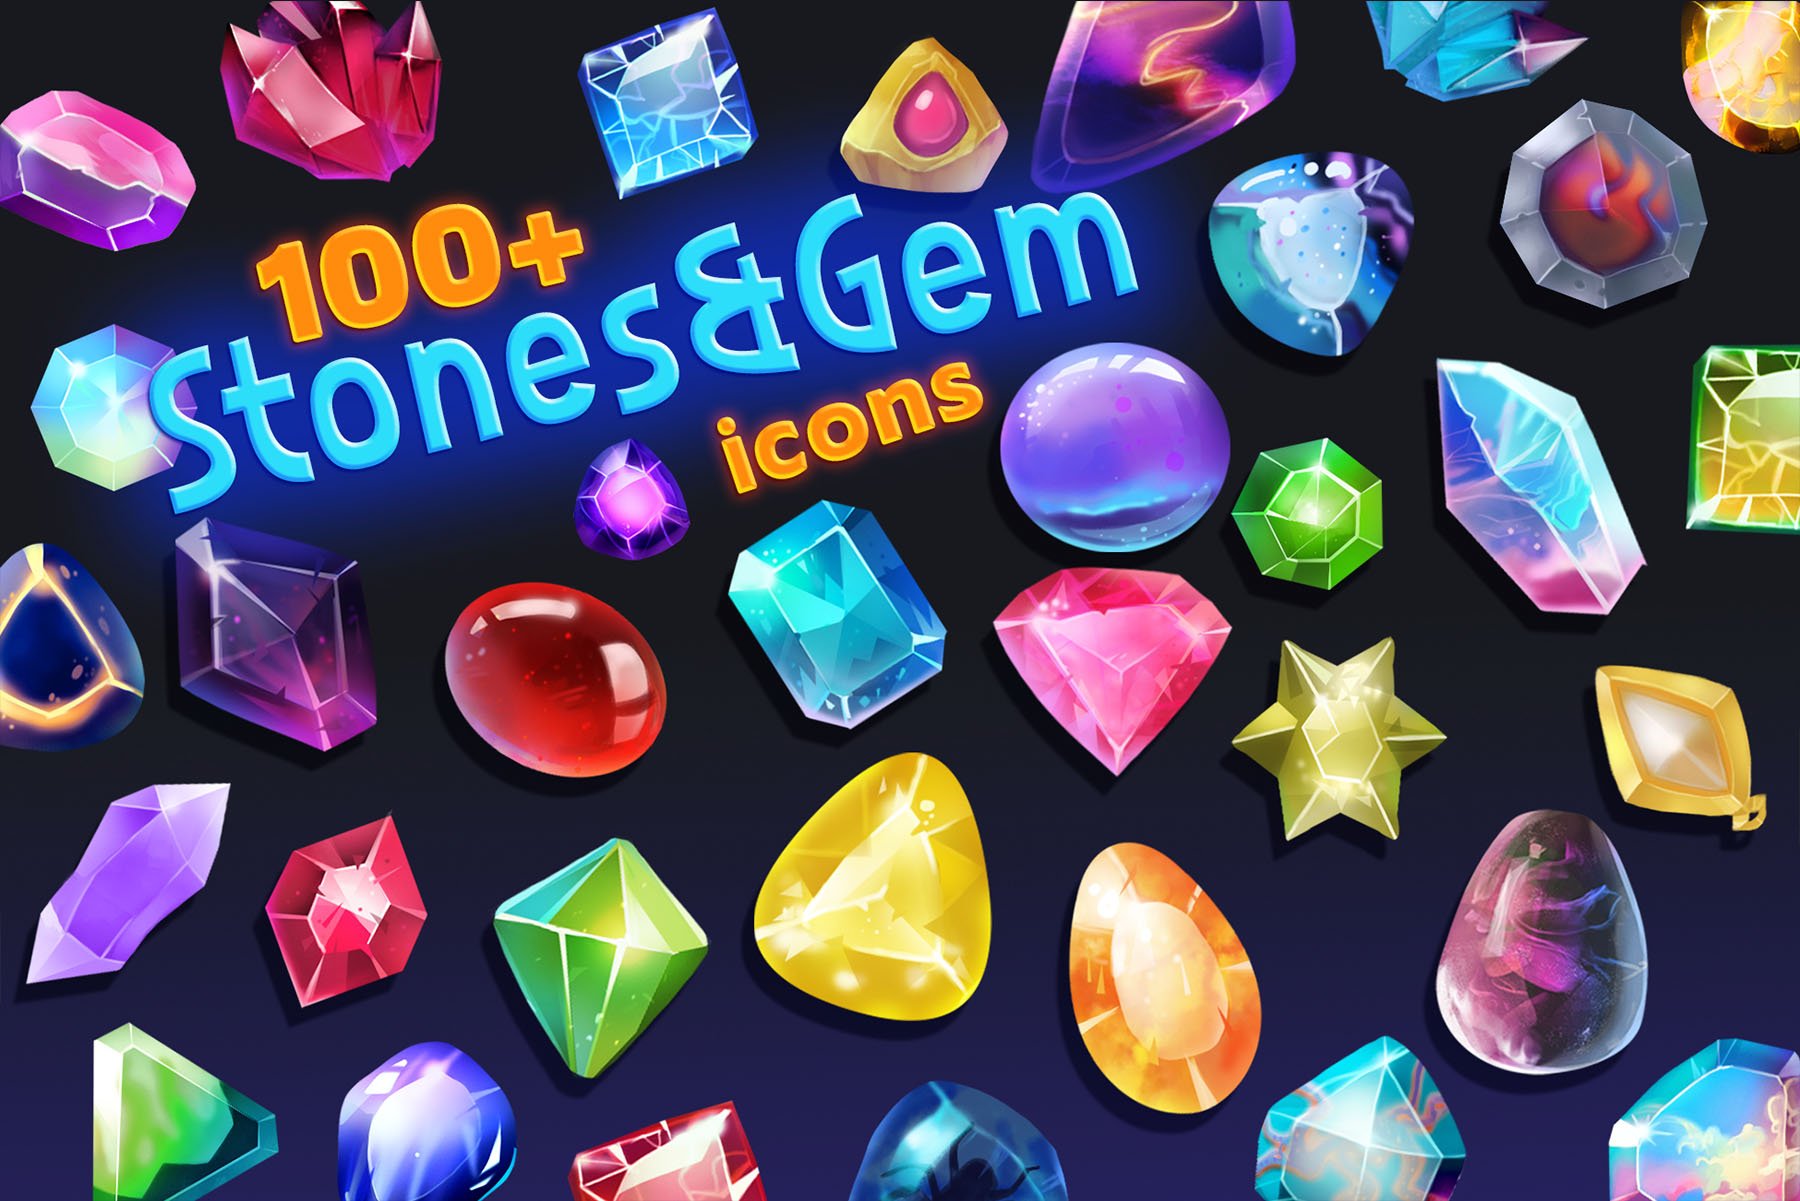 Stones & Gem Icon Pack cover image.